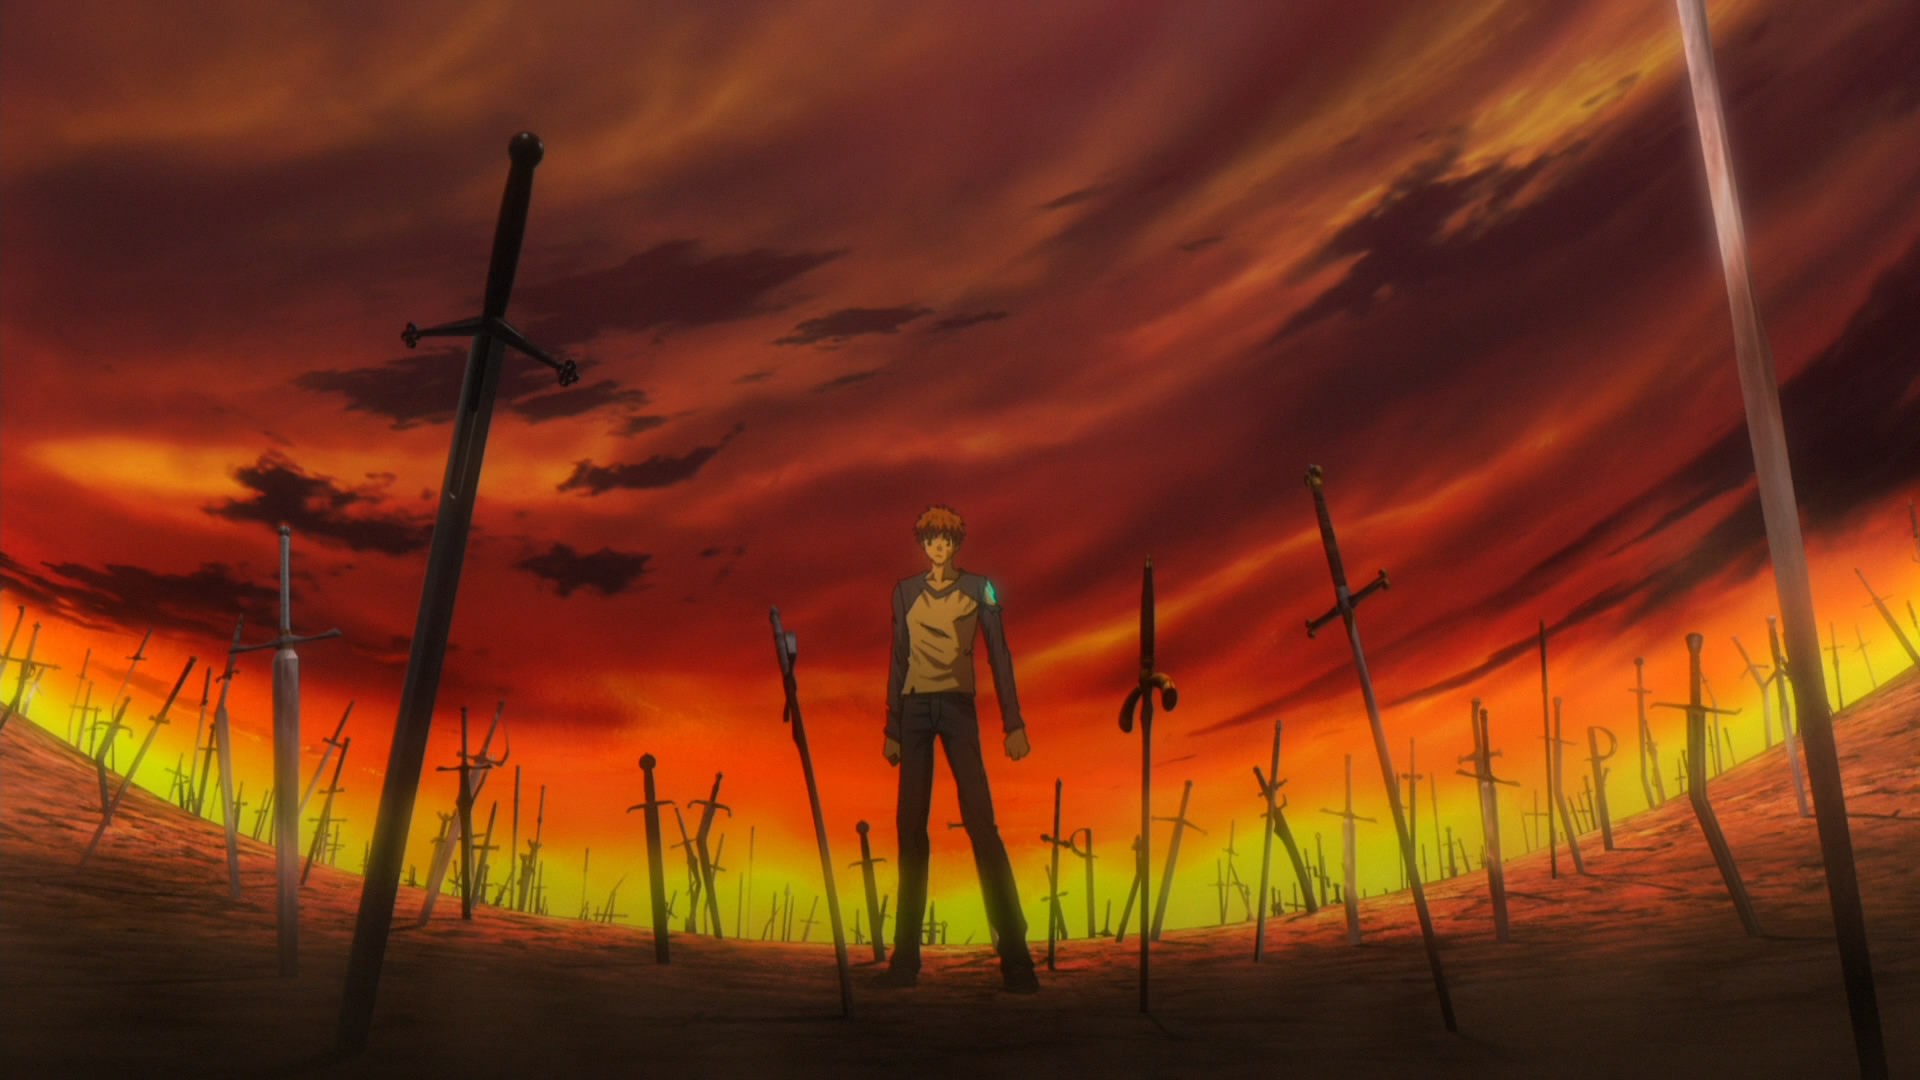 Fate Unlimited Blade Works Wallpapers